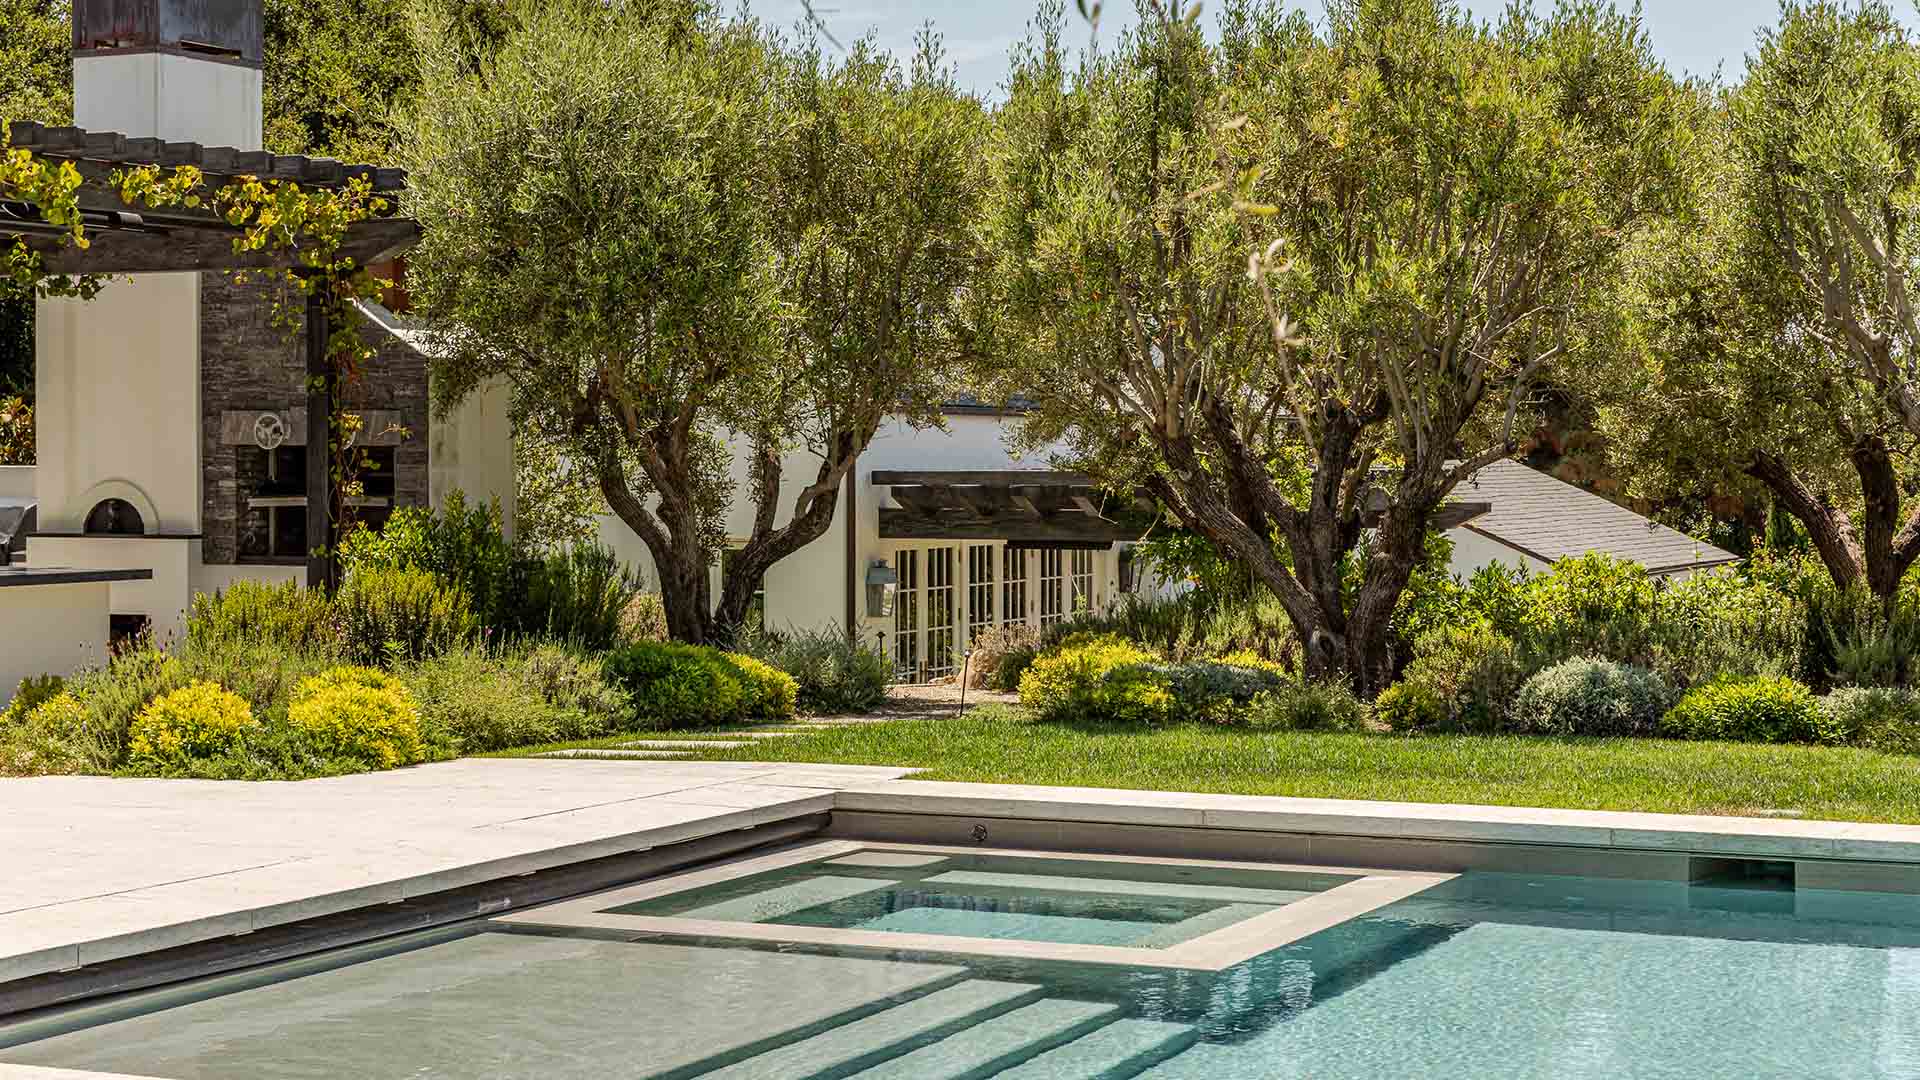 Gwyneth Paltrow Is Renting Out Her Montecito Guesthouse for Free on Airbnb for a Full Goop-Style Getaway